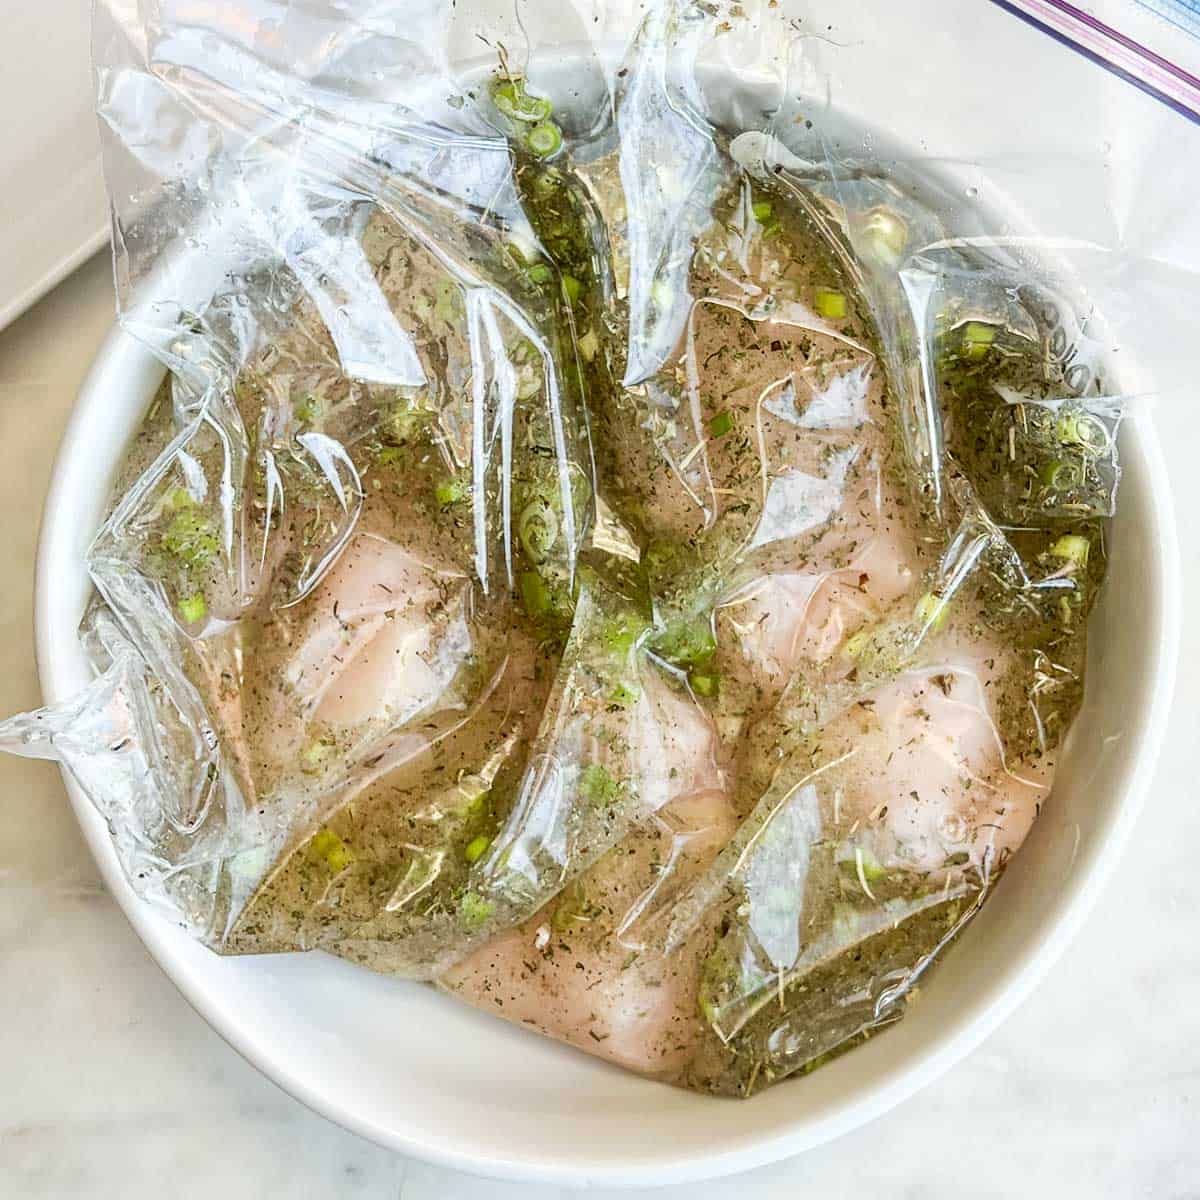 Chicken marinating in a ziploc bag set in a white bowl.